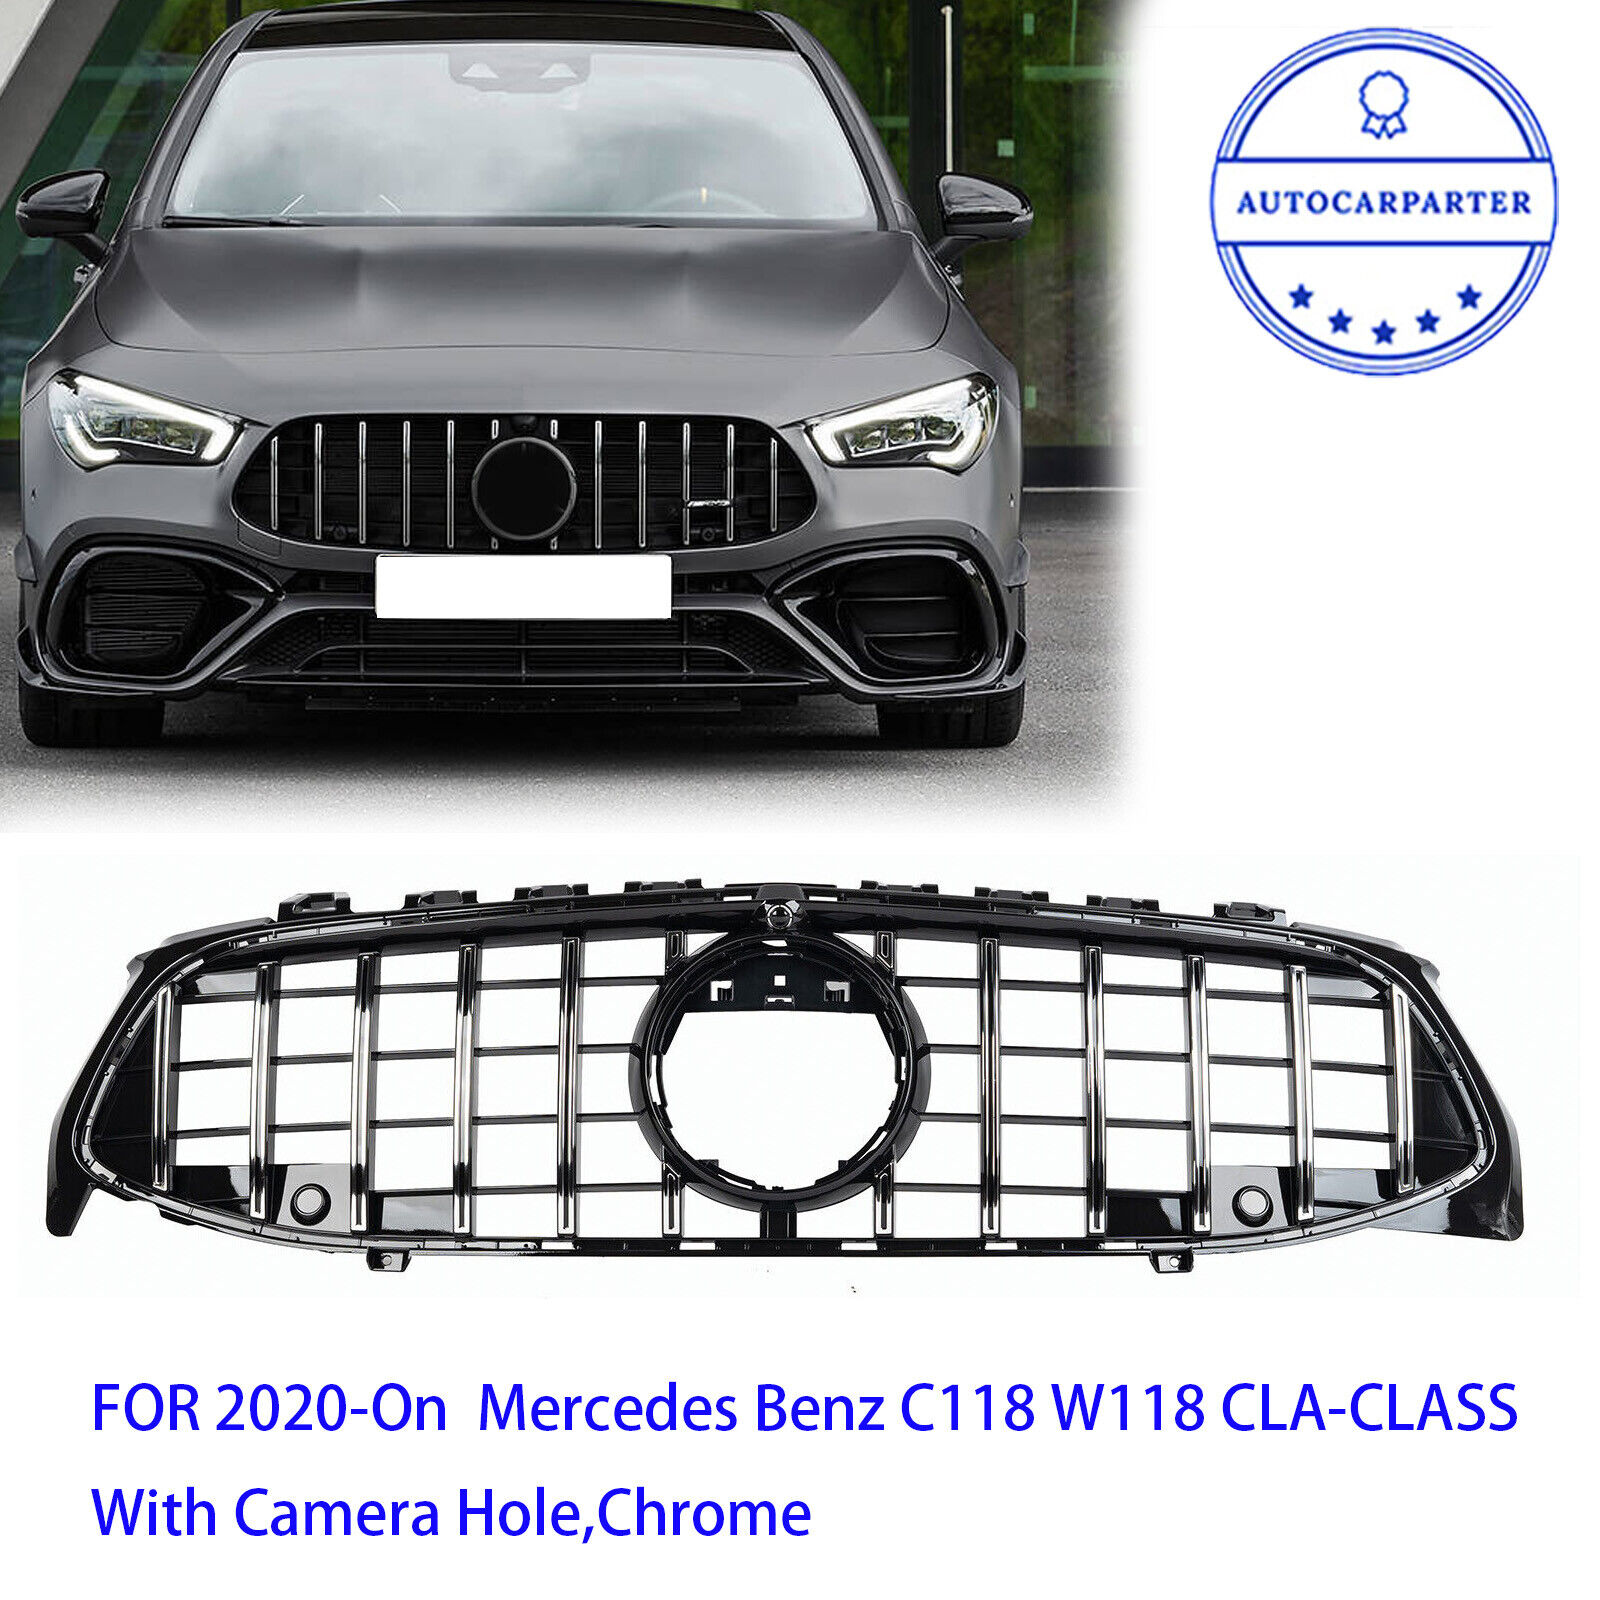 Glossy Black GT R Front Grille For Mercedes Benz CLA W118 C118 CLA35 AMG 2020-ON